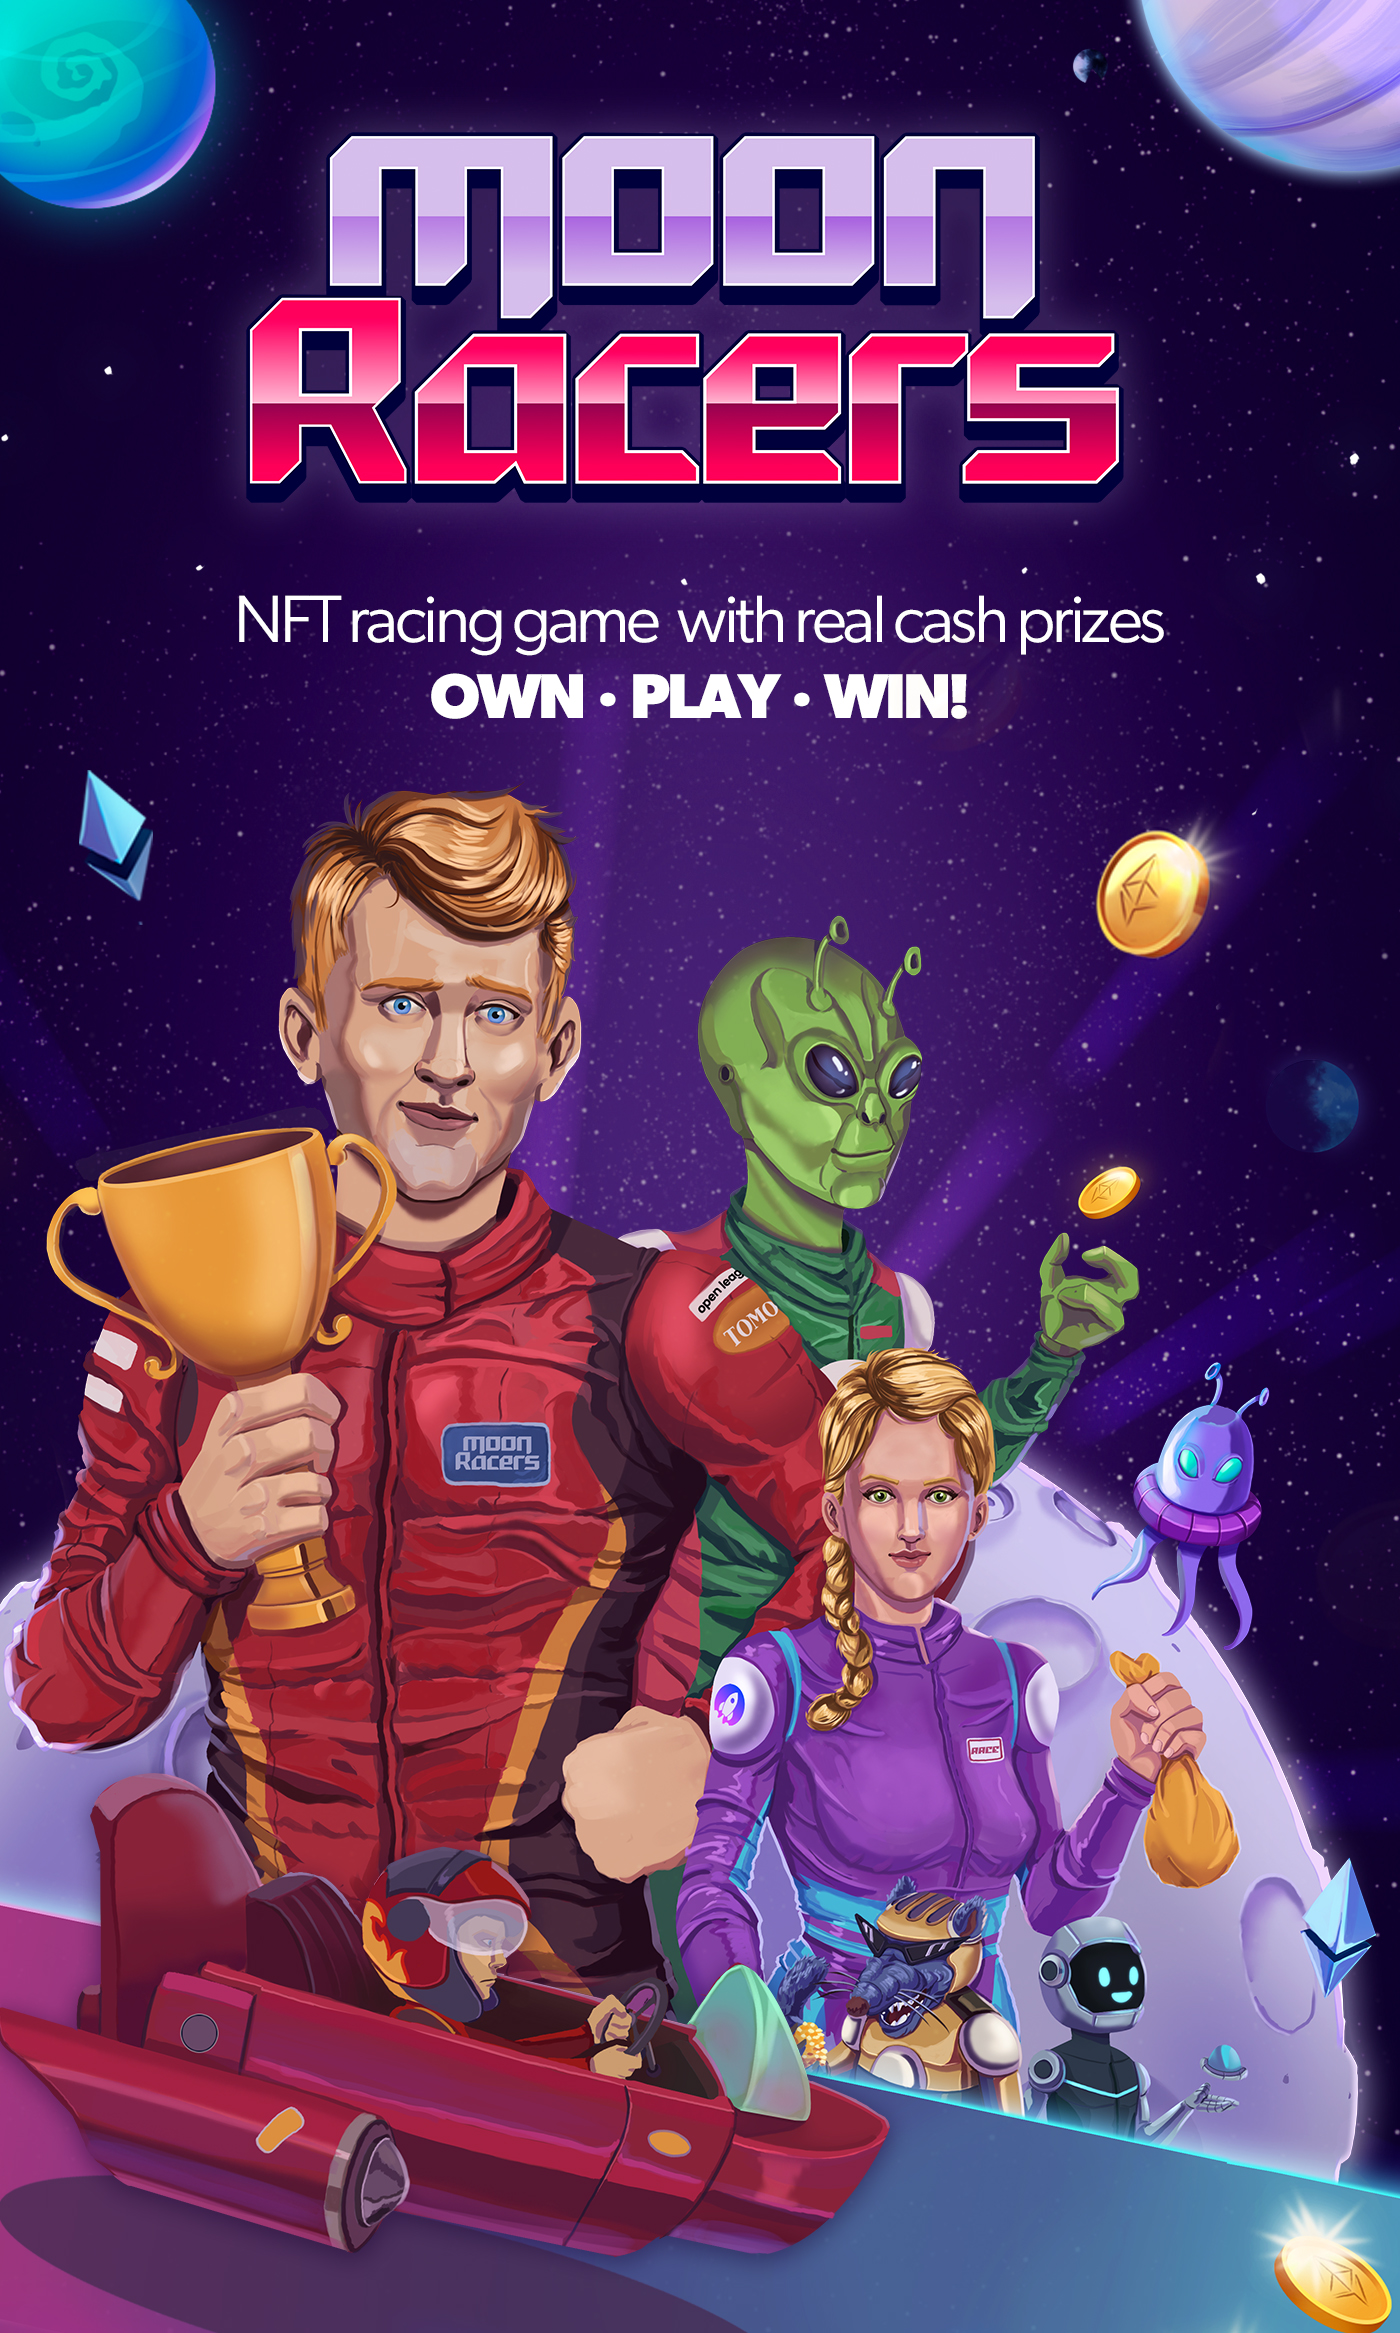 lac

NET racing game with real cash prizes
OWN - PLAY - WIN!